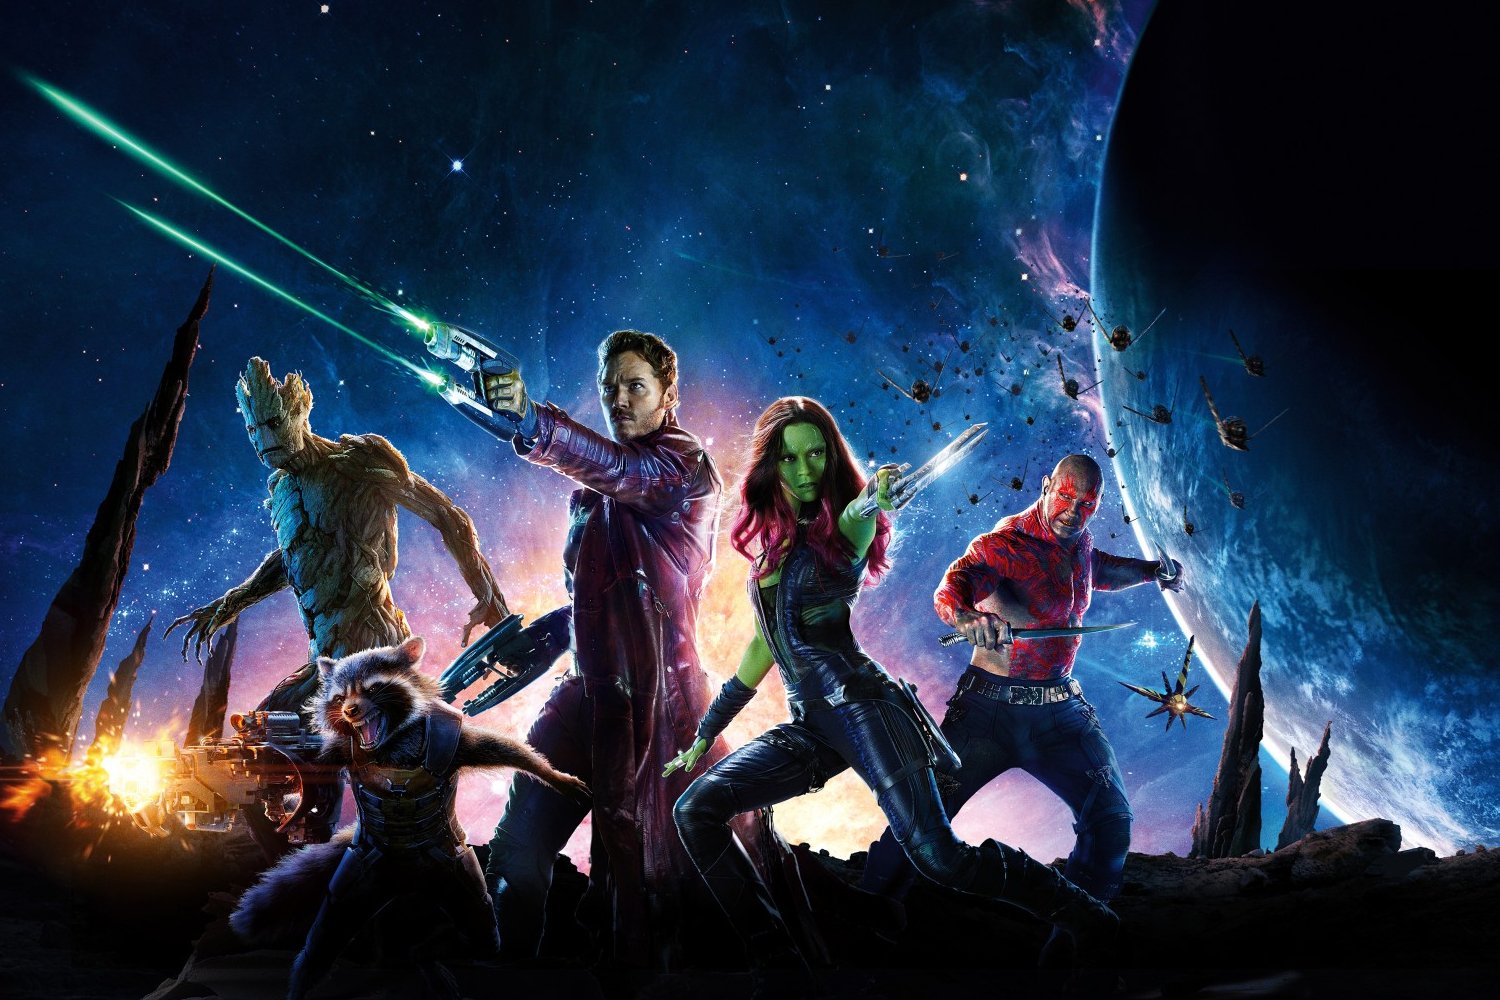 A Decade Later, the Guardians of the Galaxy Still Rock